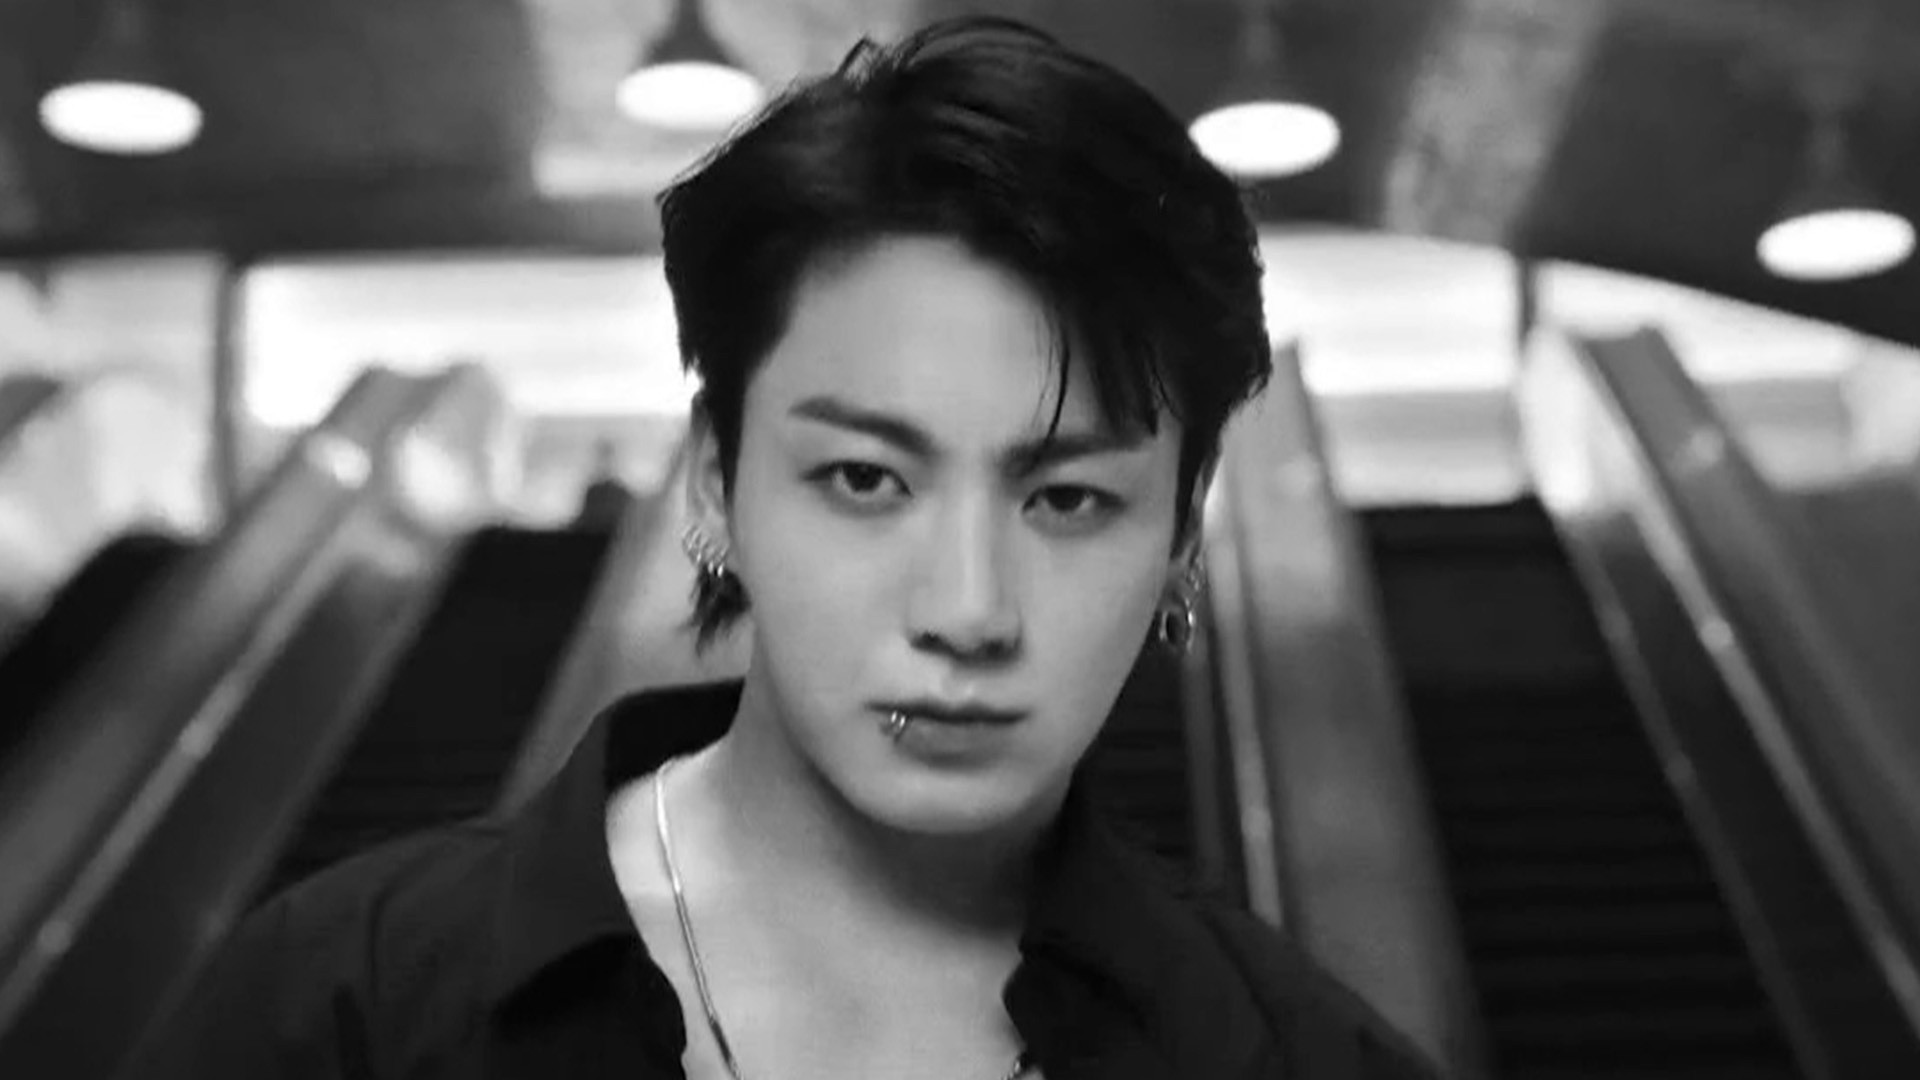 BTS Jung Kook Stars in Calvin Klein Fall Campaign: Exclusive Video